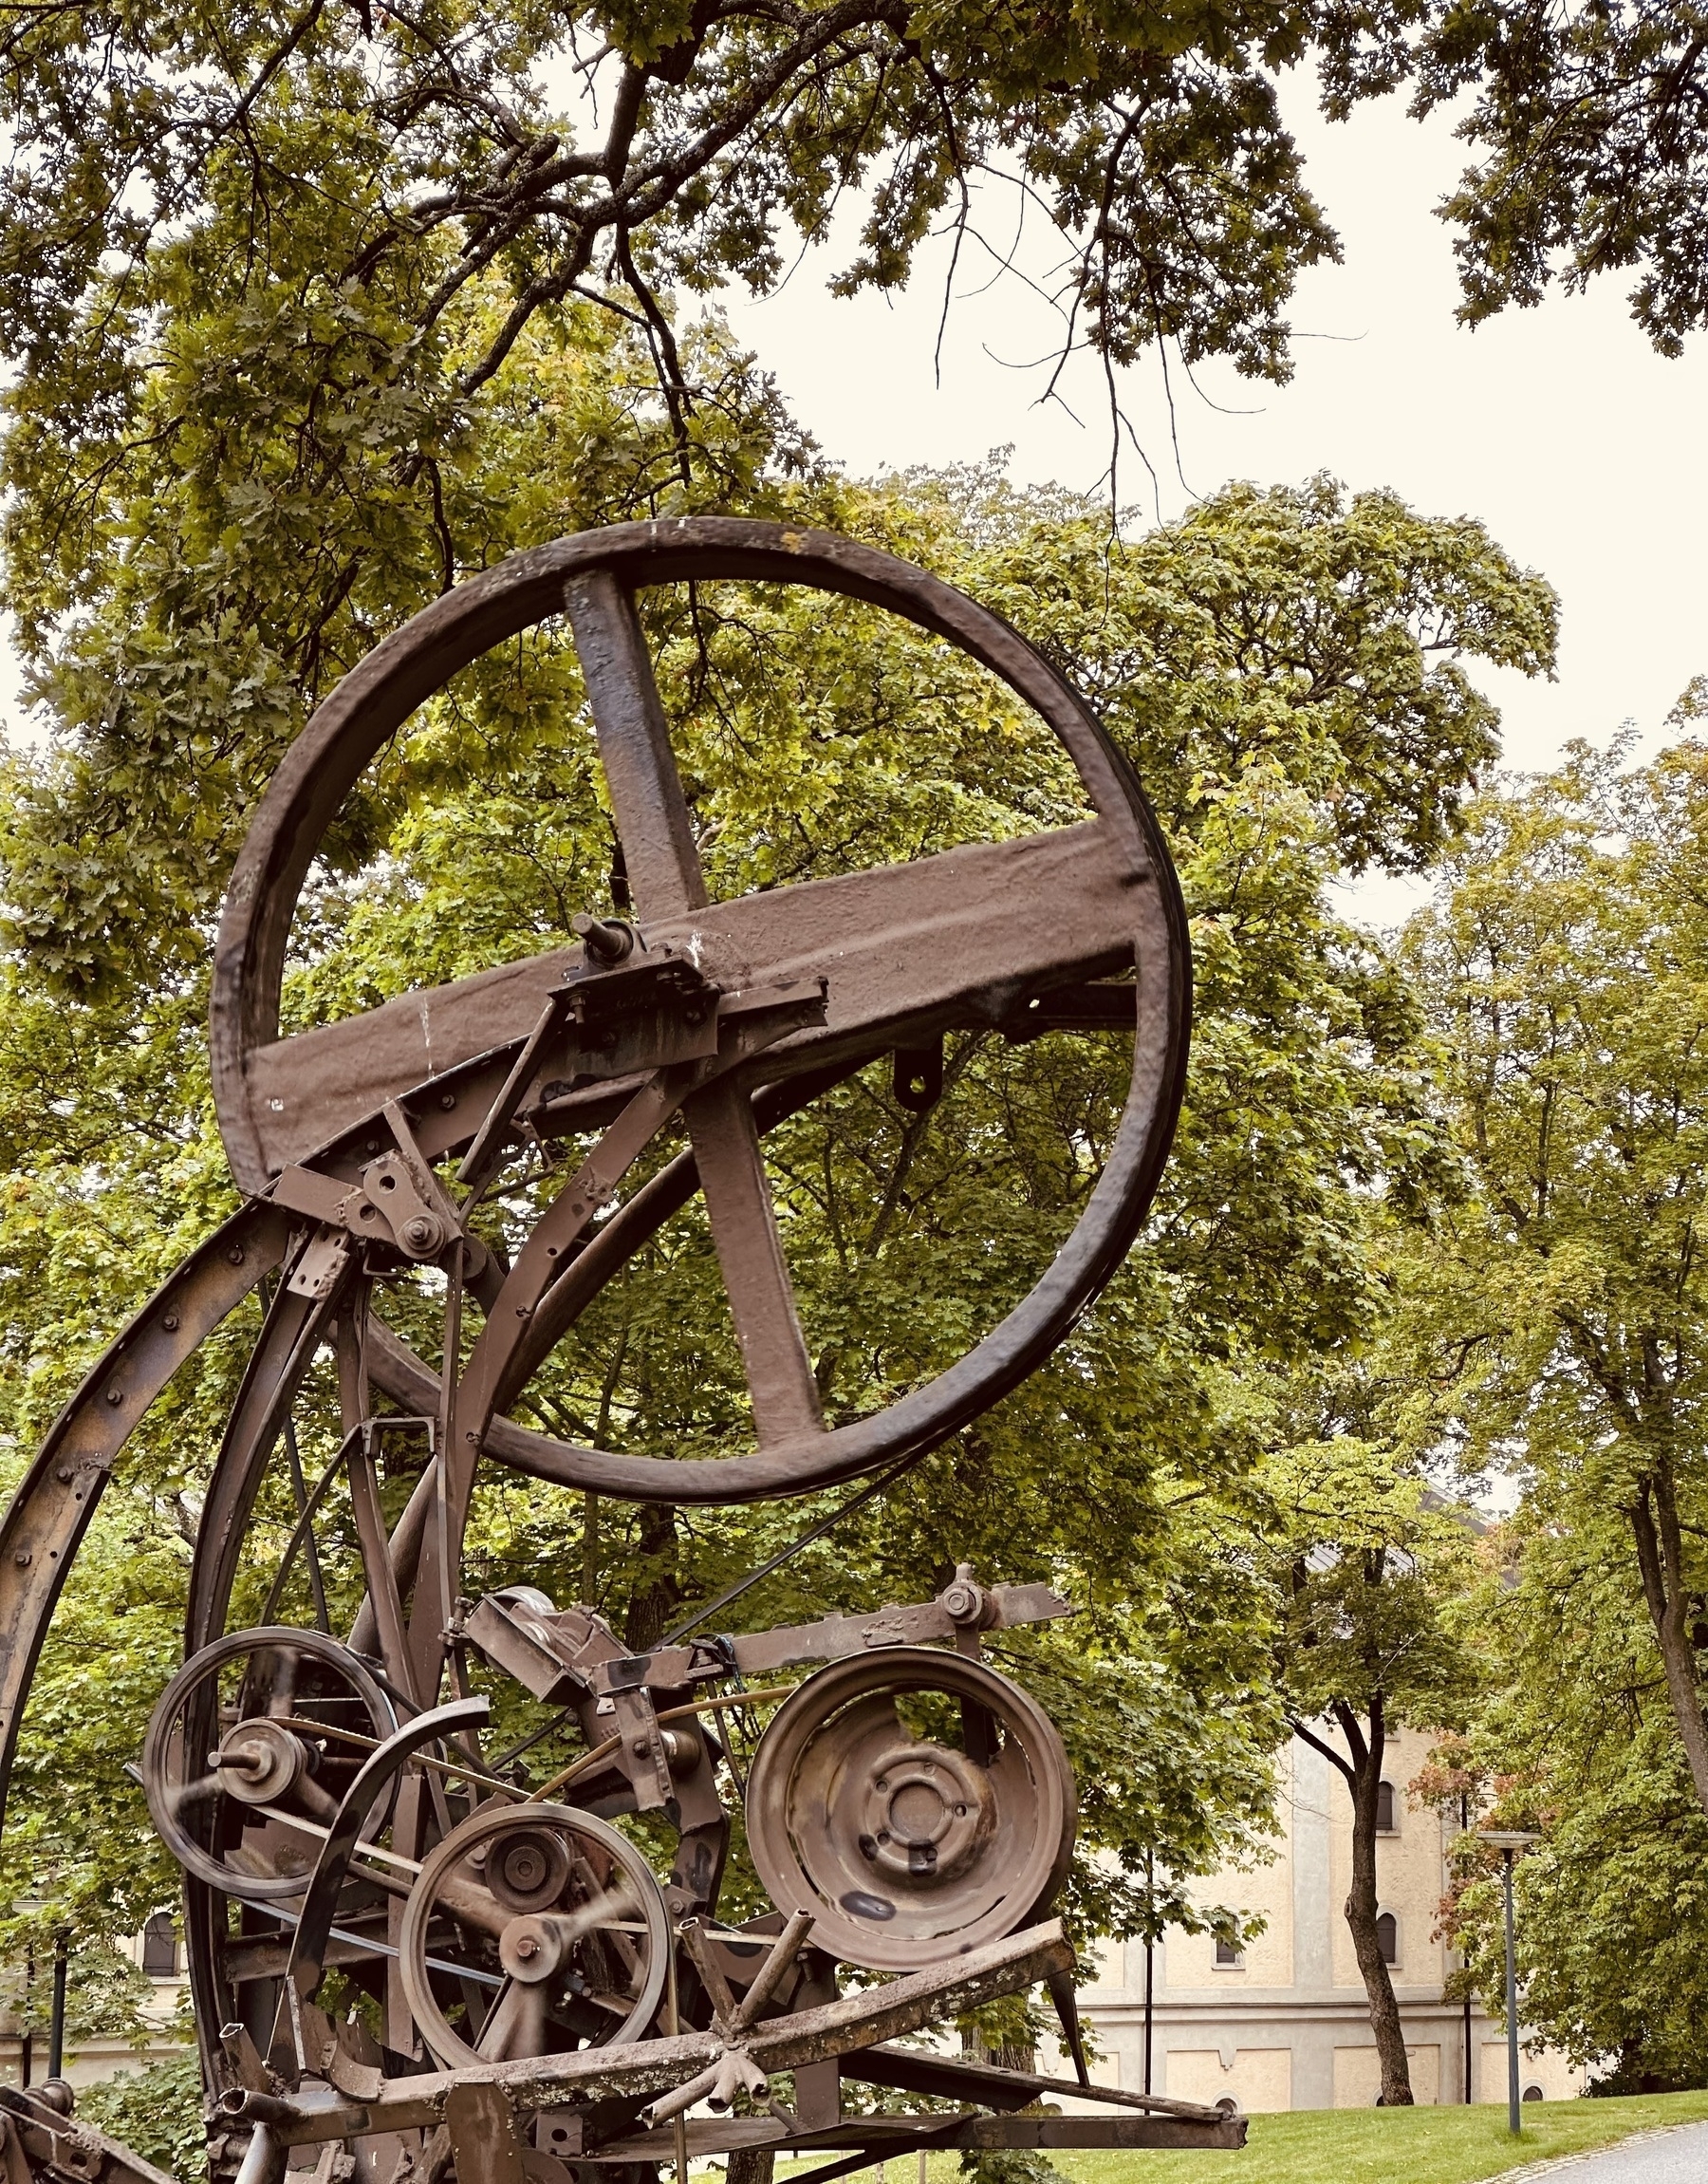 A series of brown metal wheels connected by belts, with trees in the background.